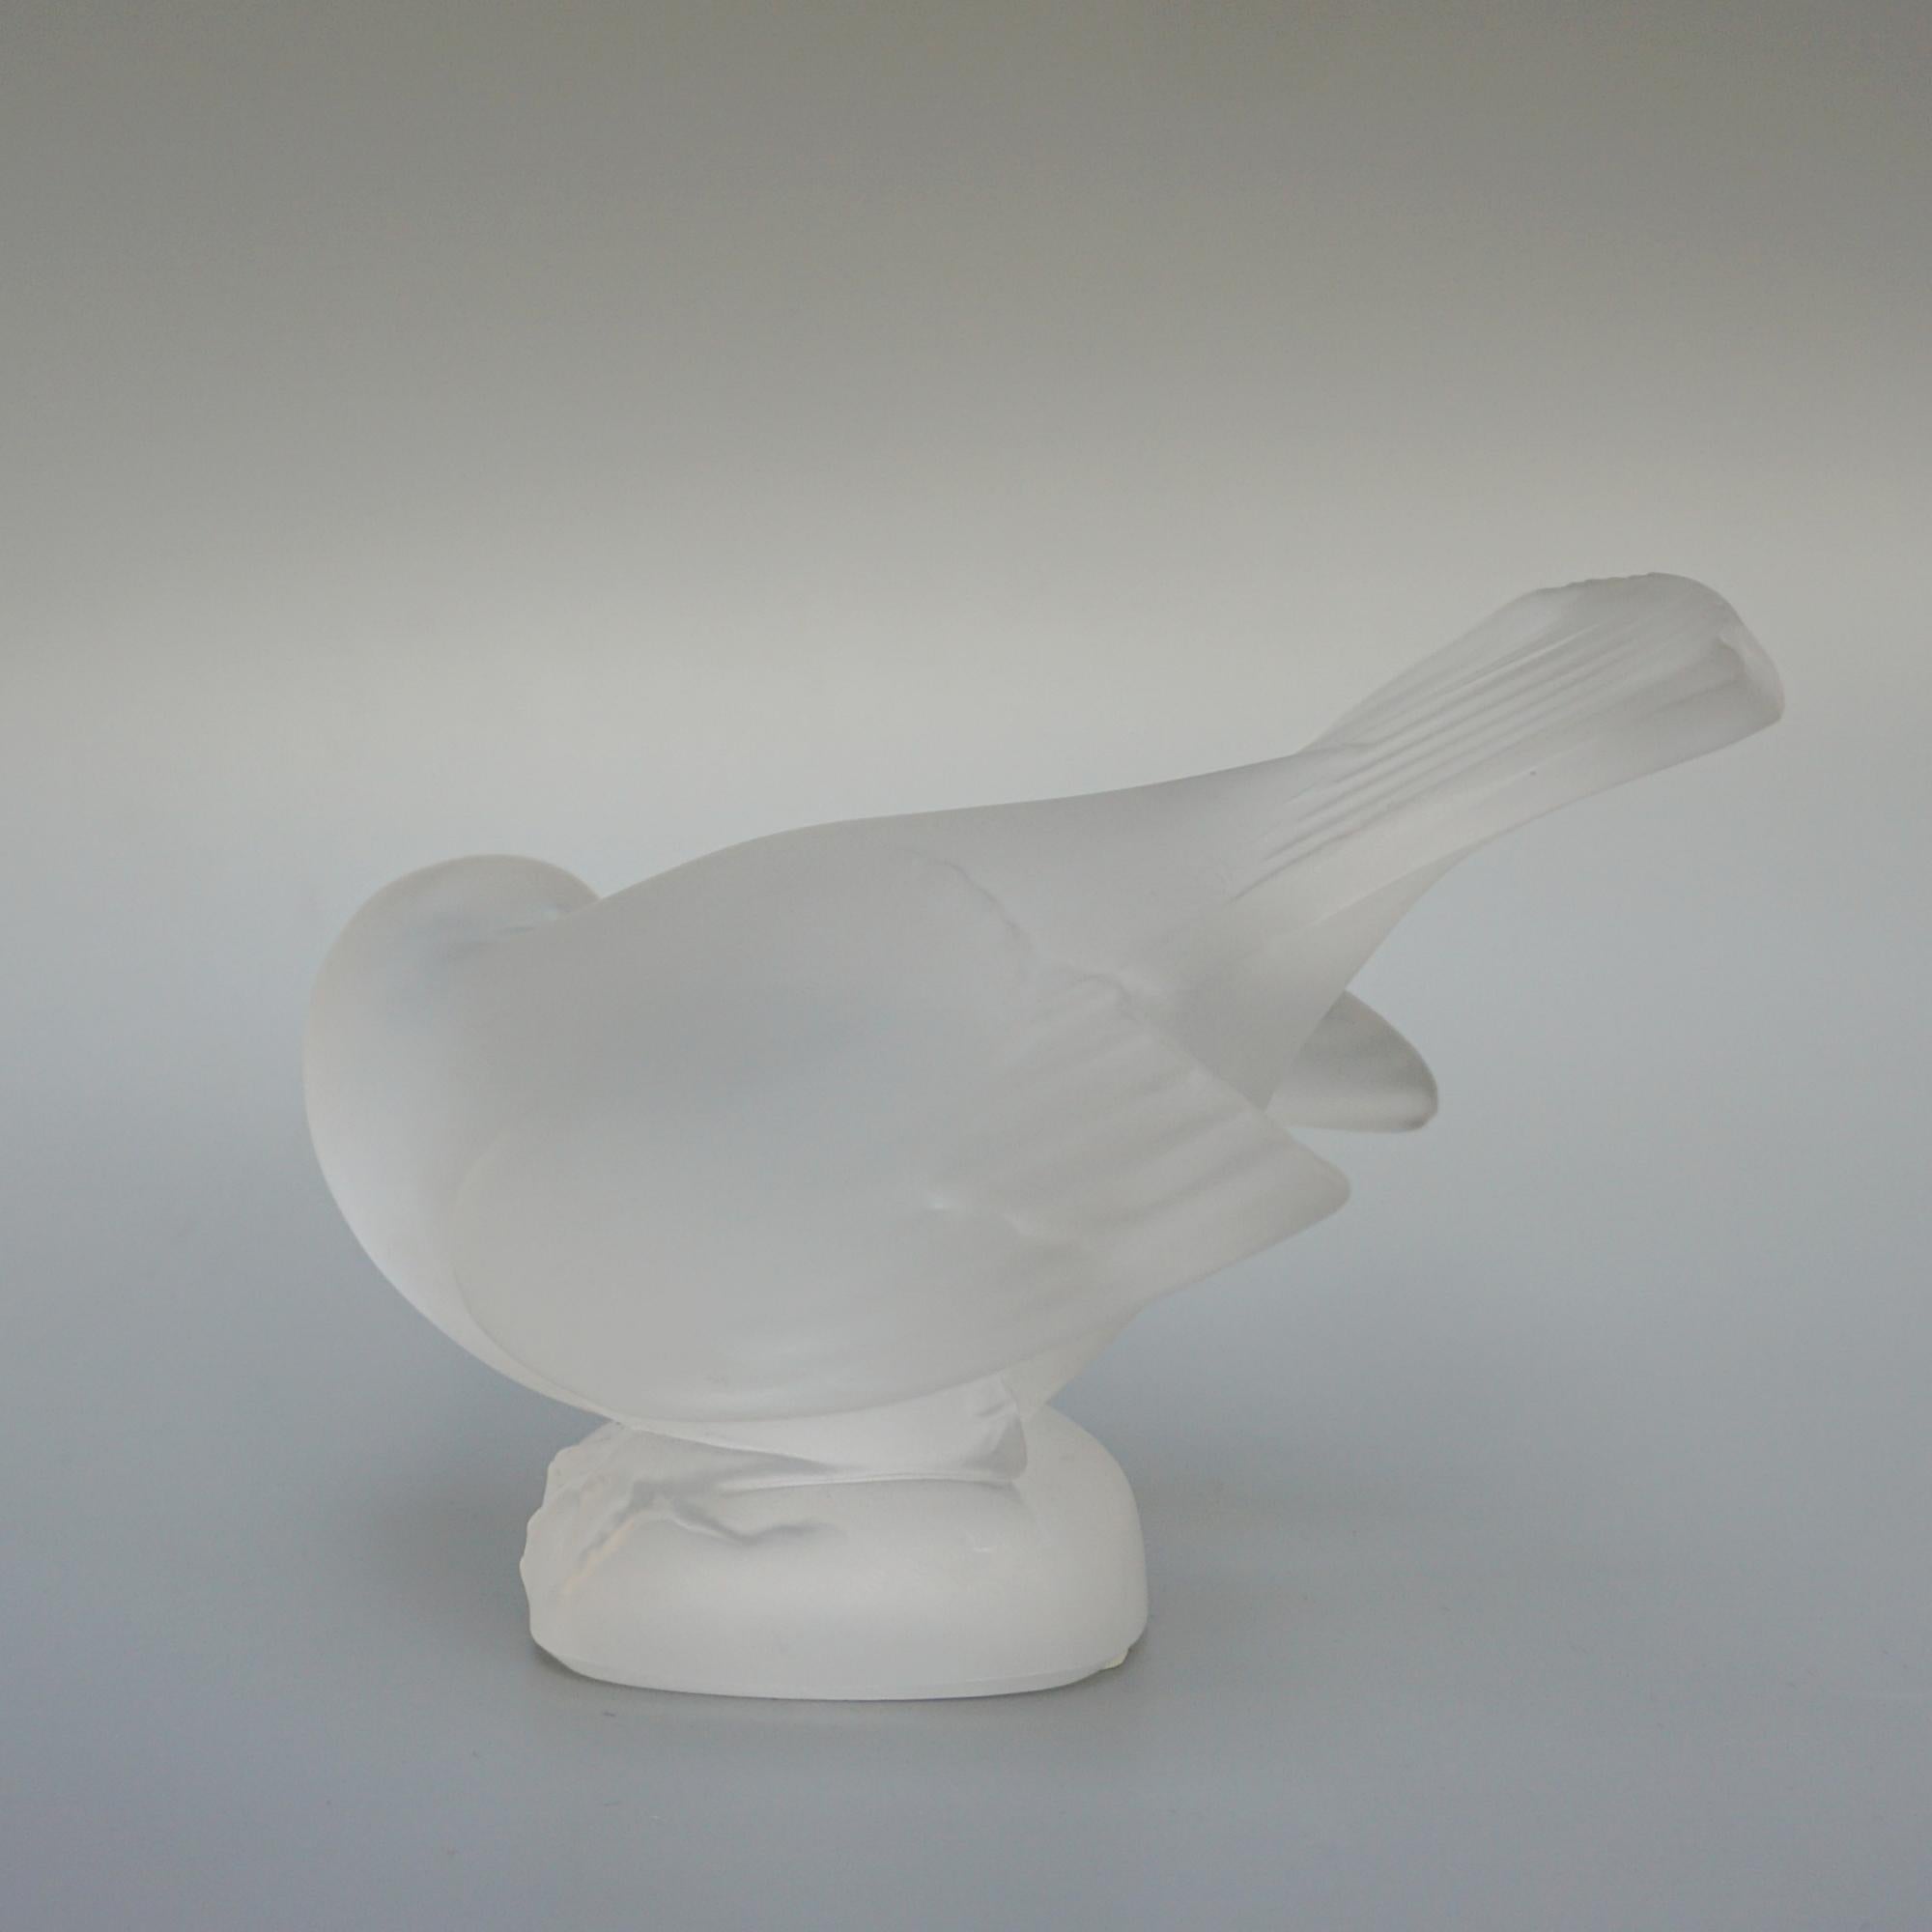 Moineau Coquet A Glass Paperweight By Lalique 2